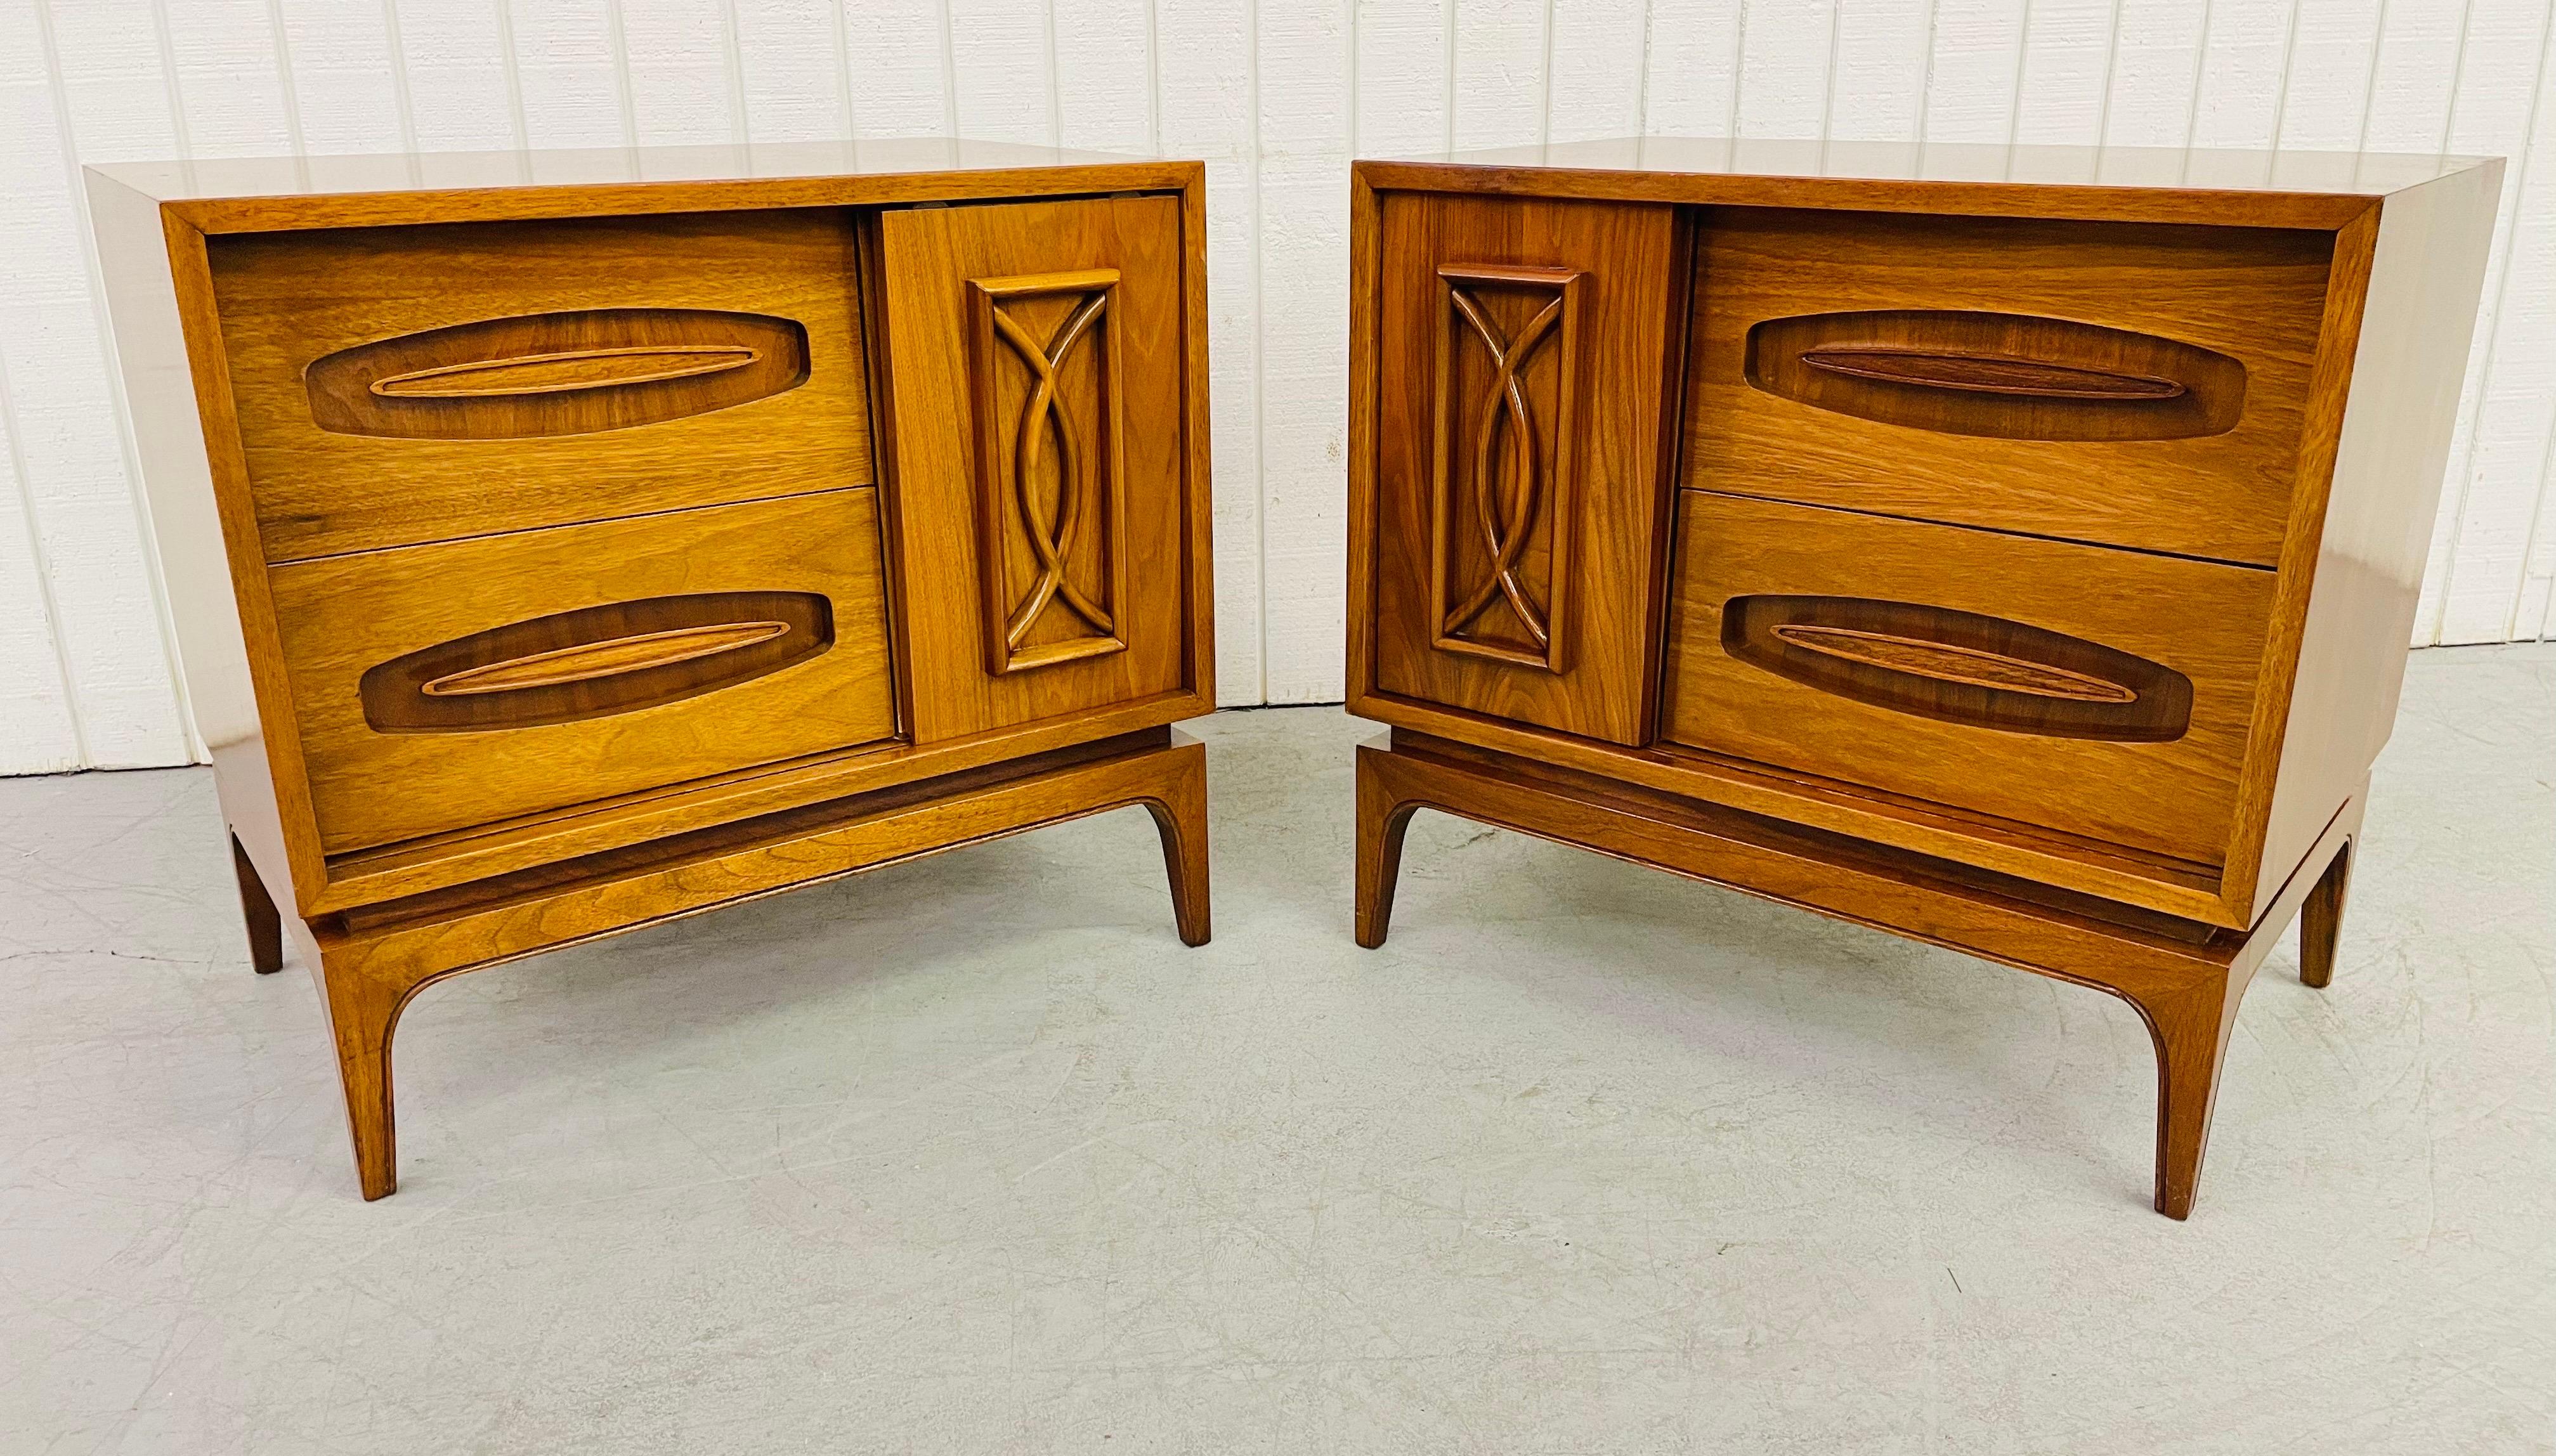 This listing is for a pair of mid-century Young MFG walnut nightstands. Featuring a sliding door, a glass shelf, two drawers for storage, and a beautiful walnut finish.